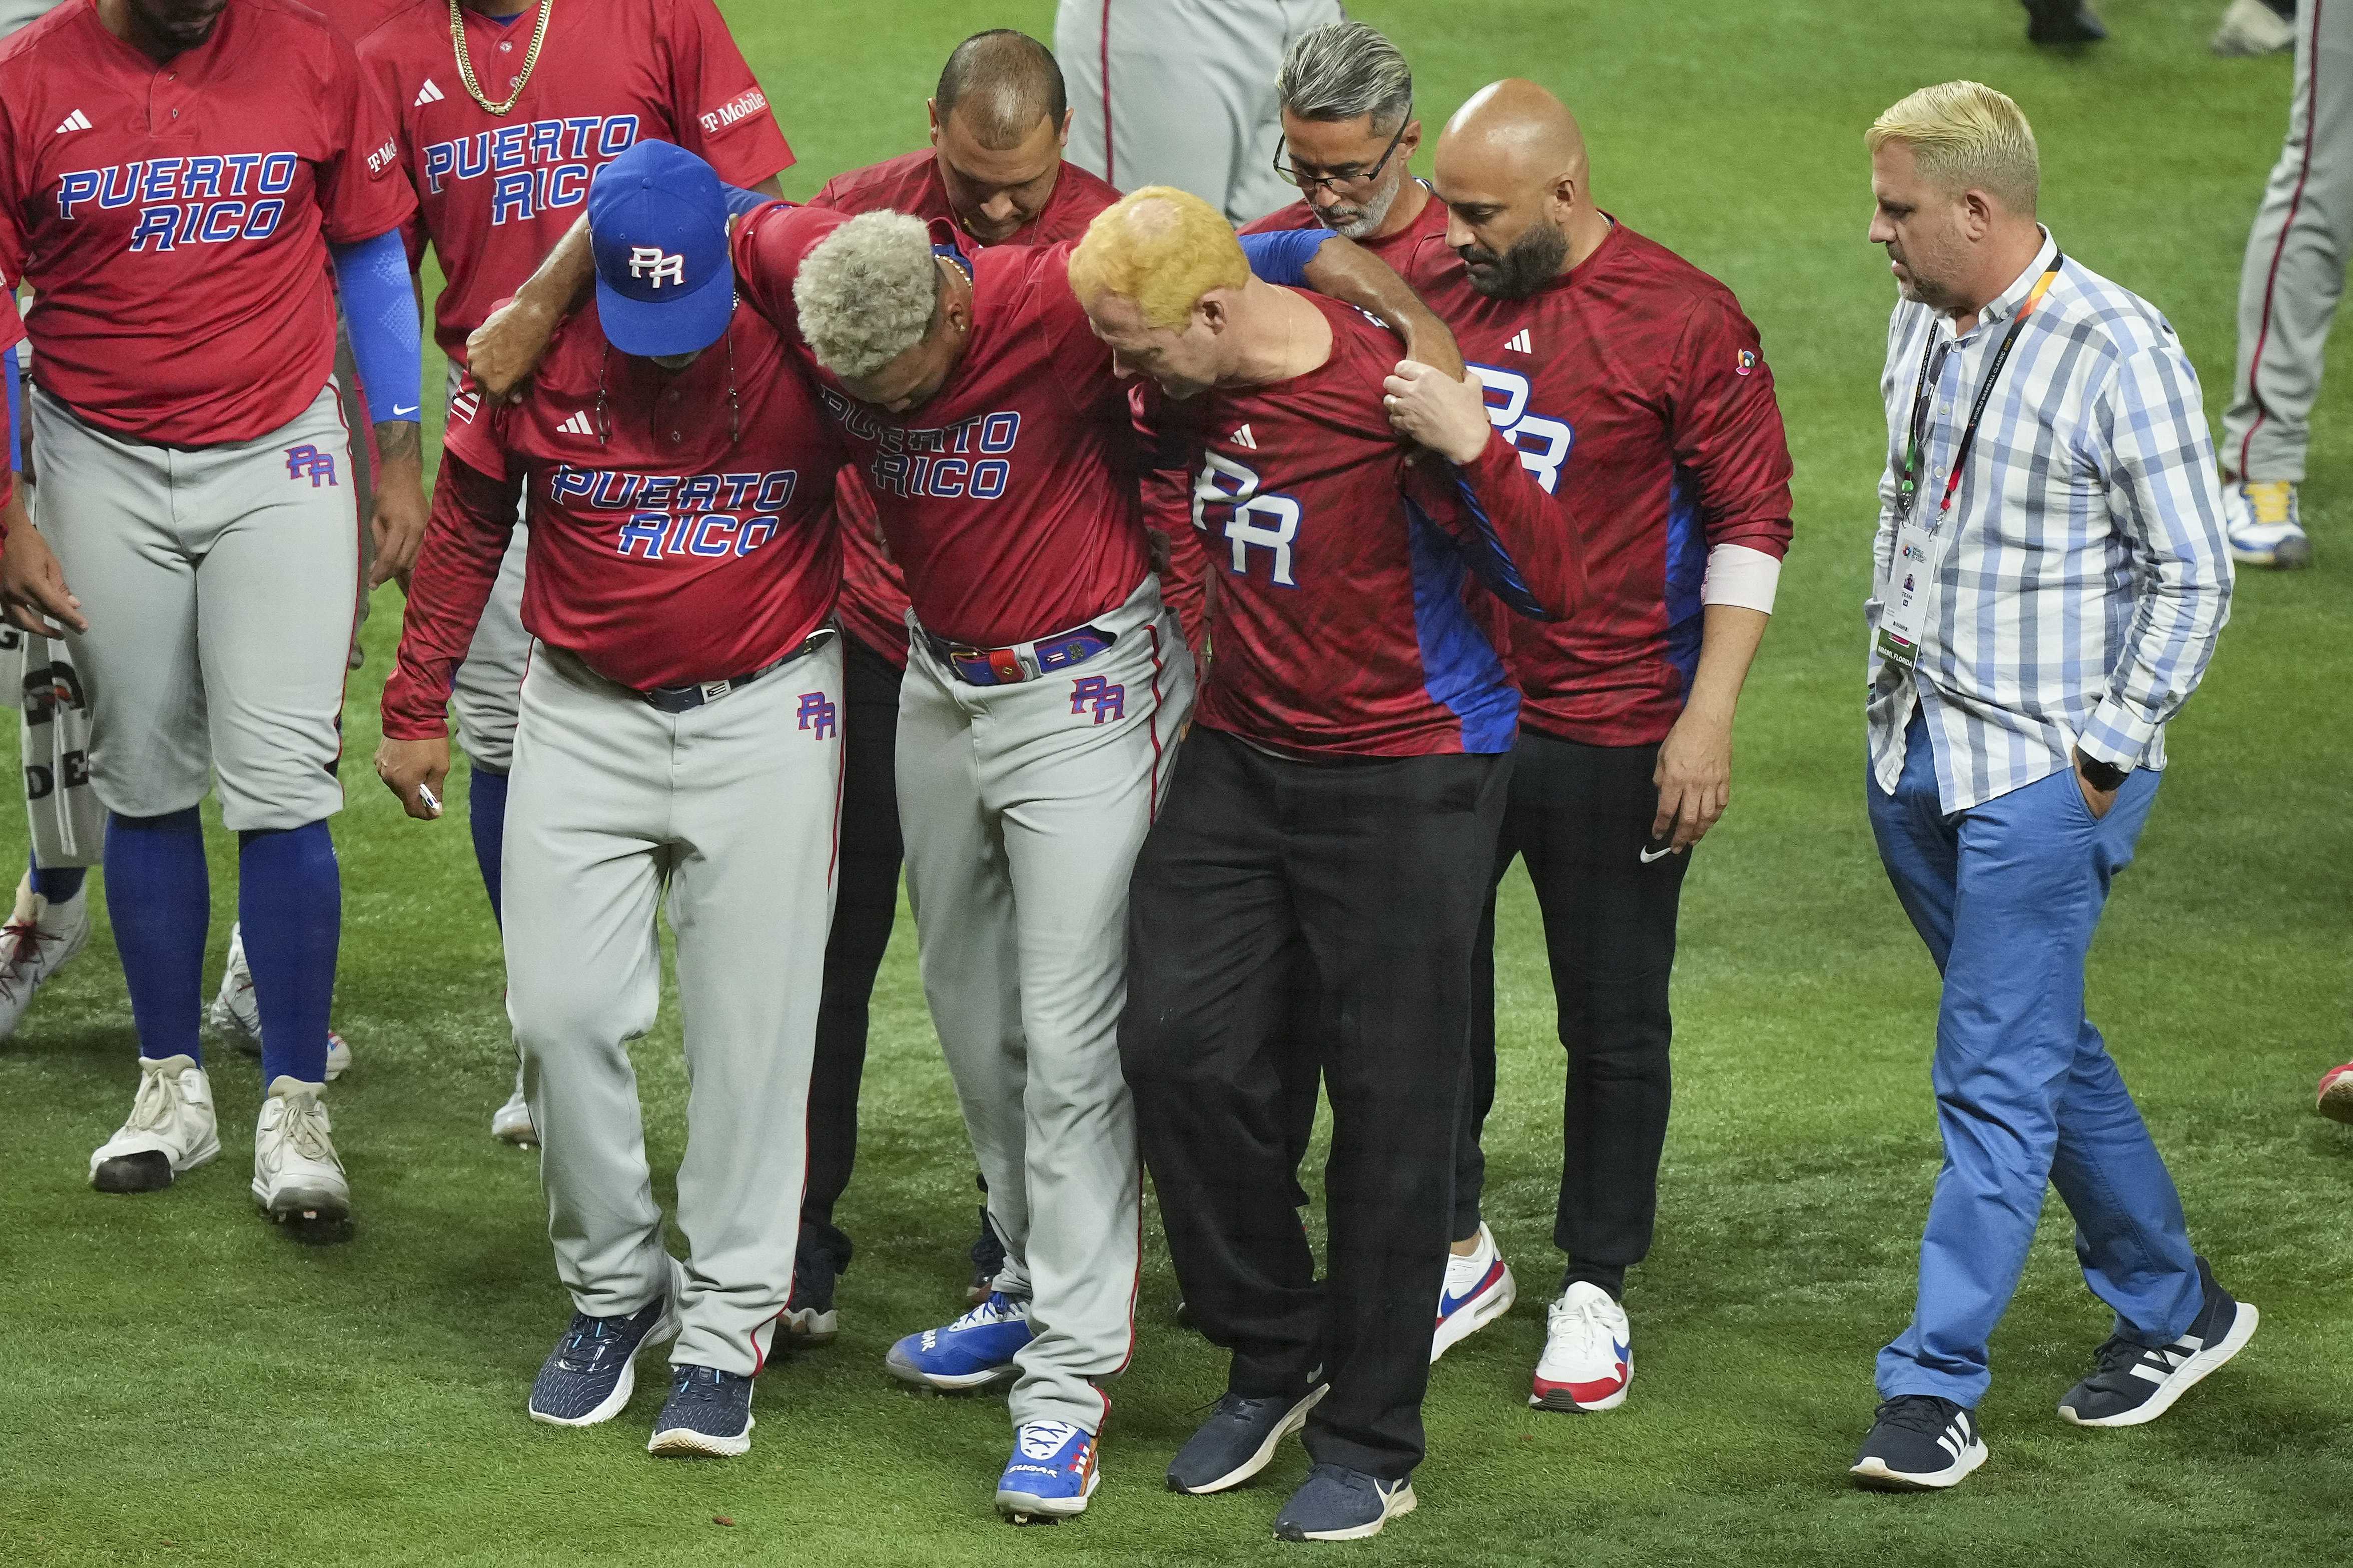 Mets' closer Edwin Diaz expected to miss season after suffering knee injury  at World Baseball Classic - CBS New York